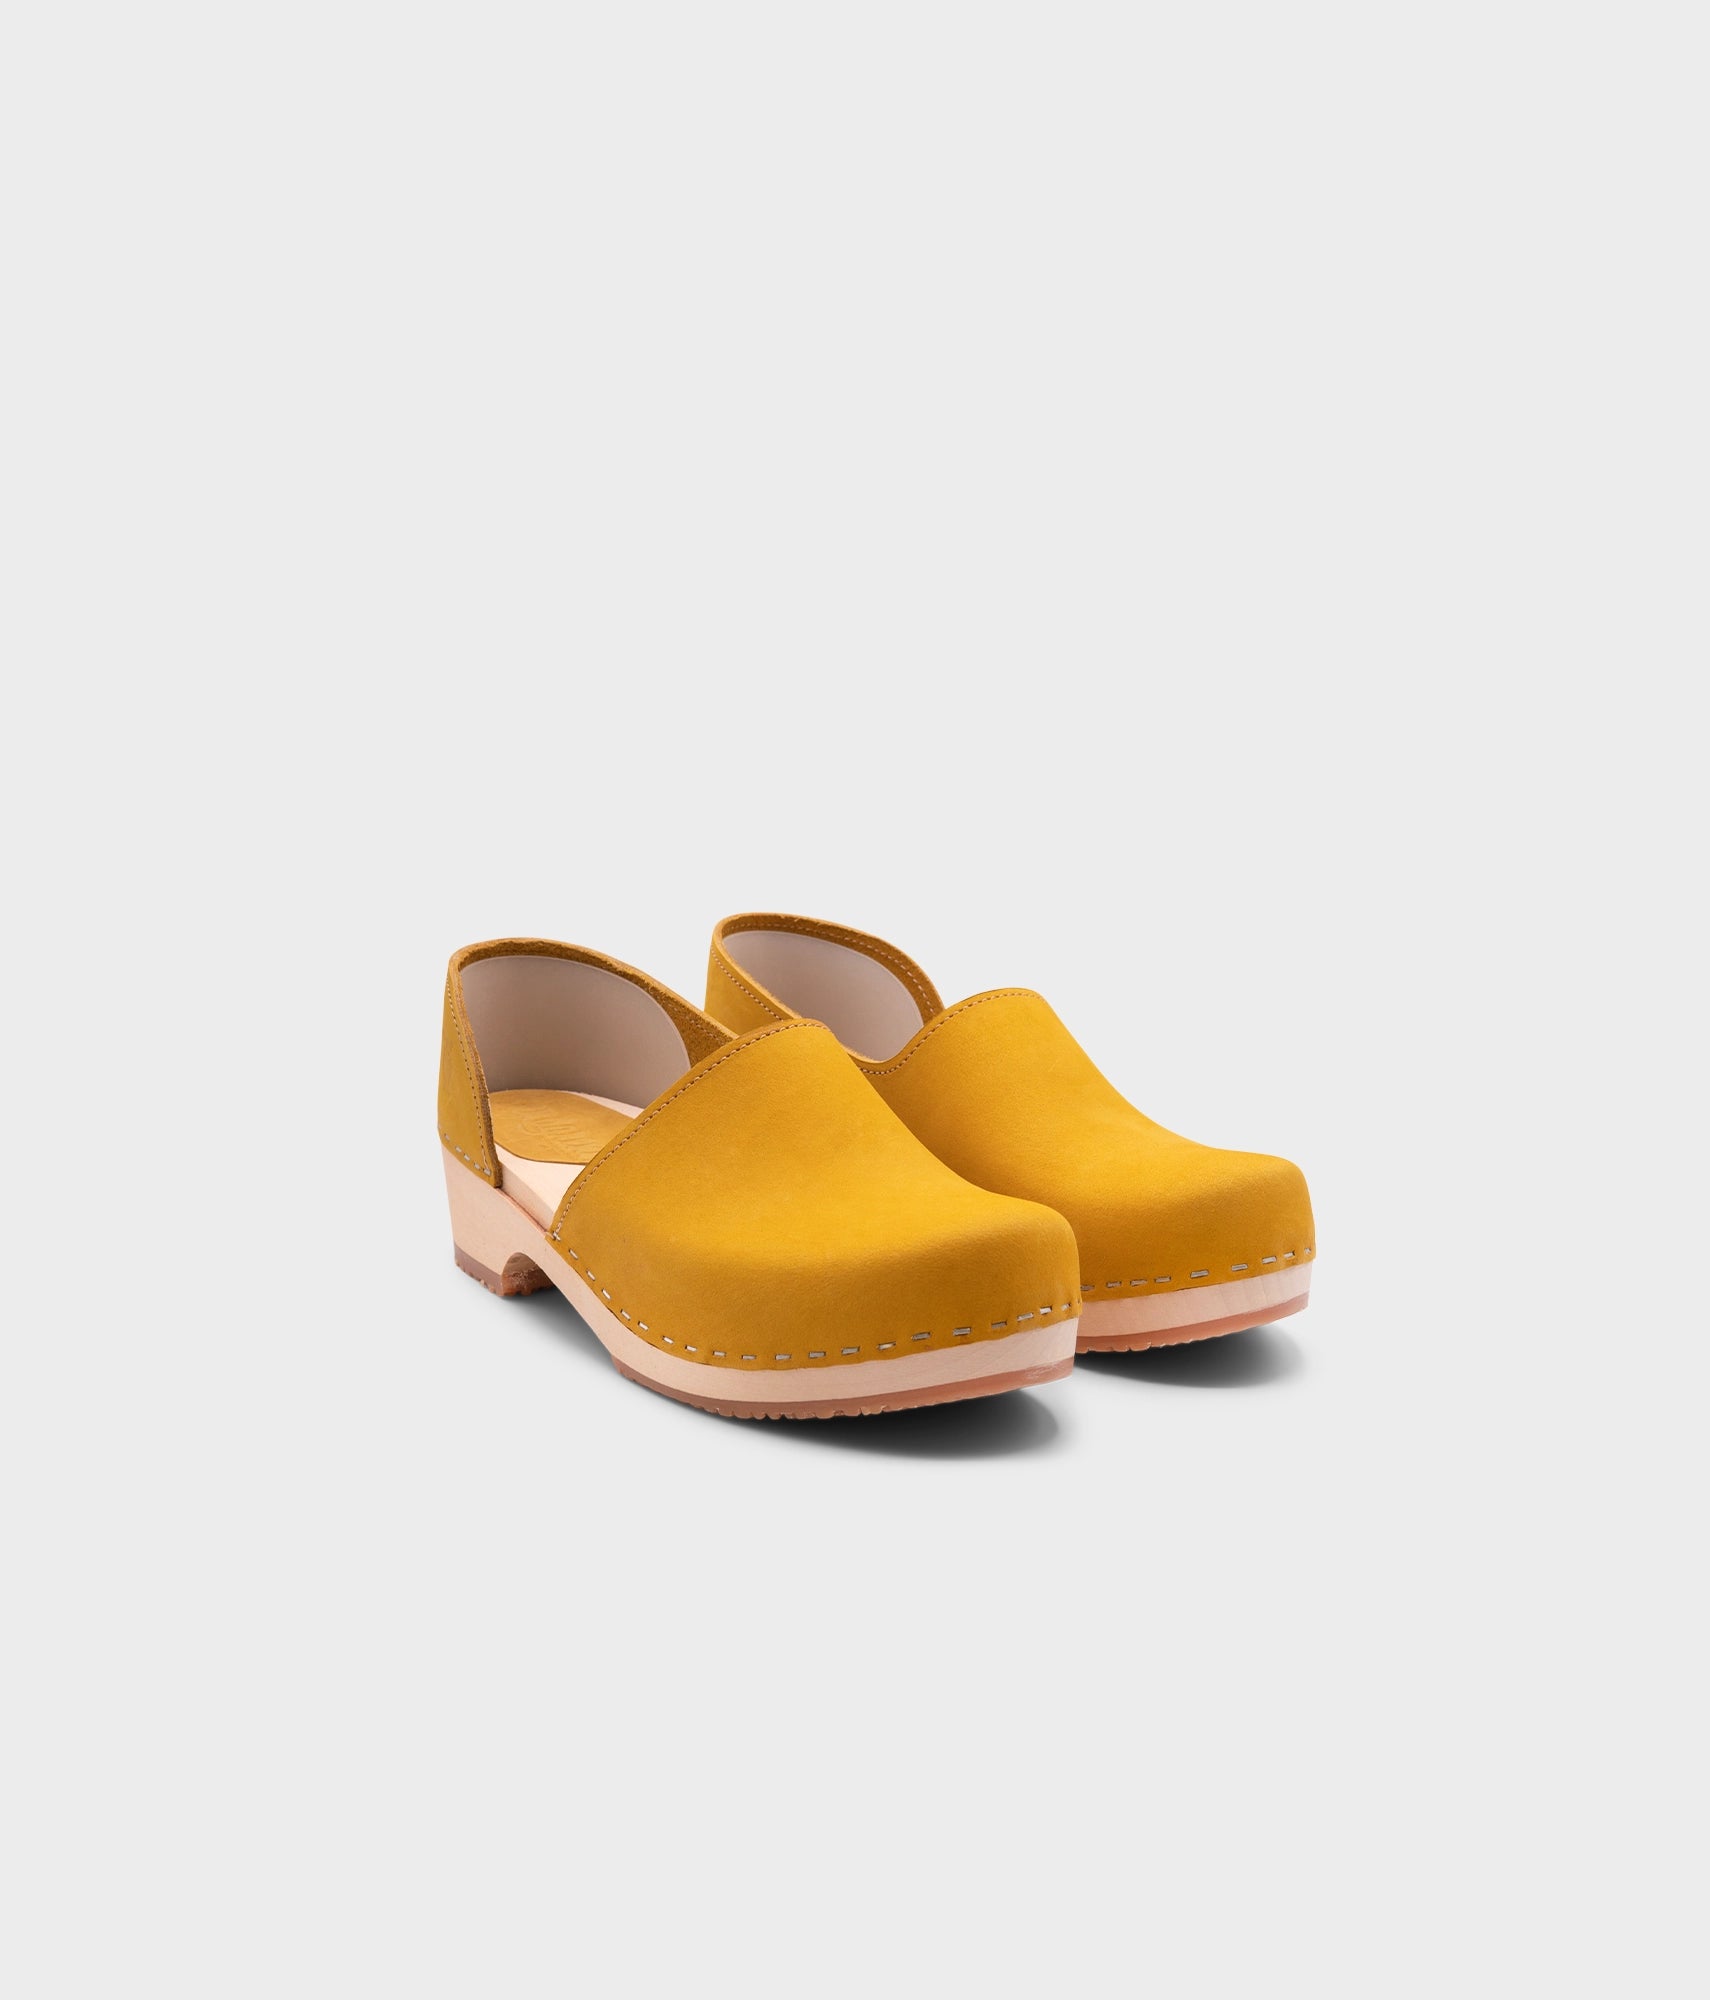 low heeled closed-back clogs in yellow nubuck leather stapled on a light wooden base